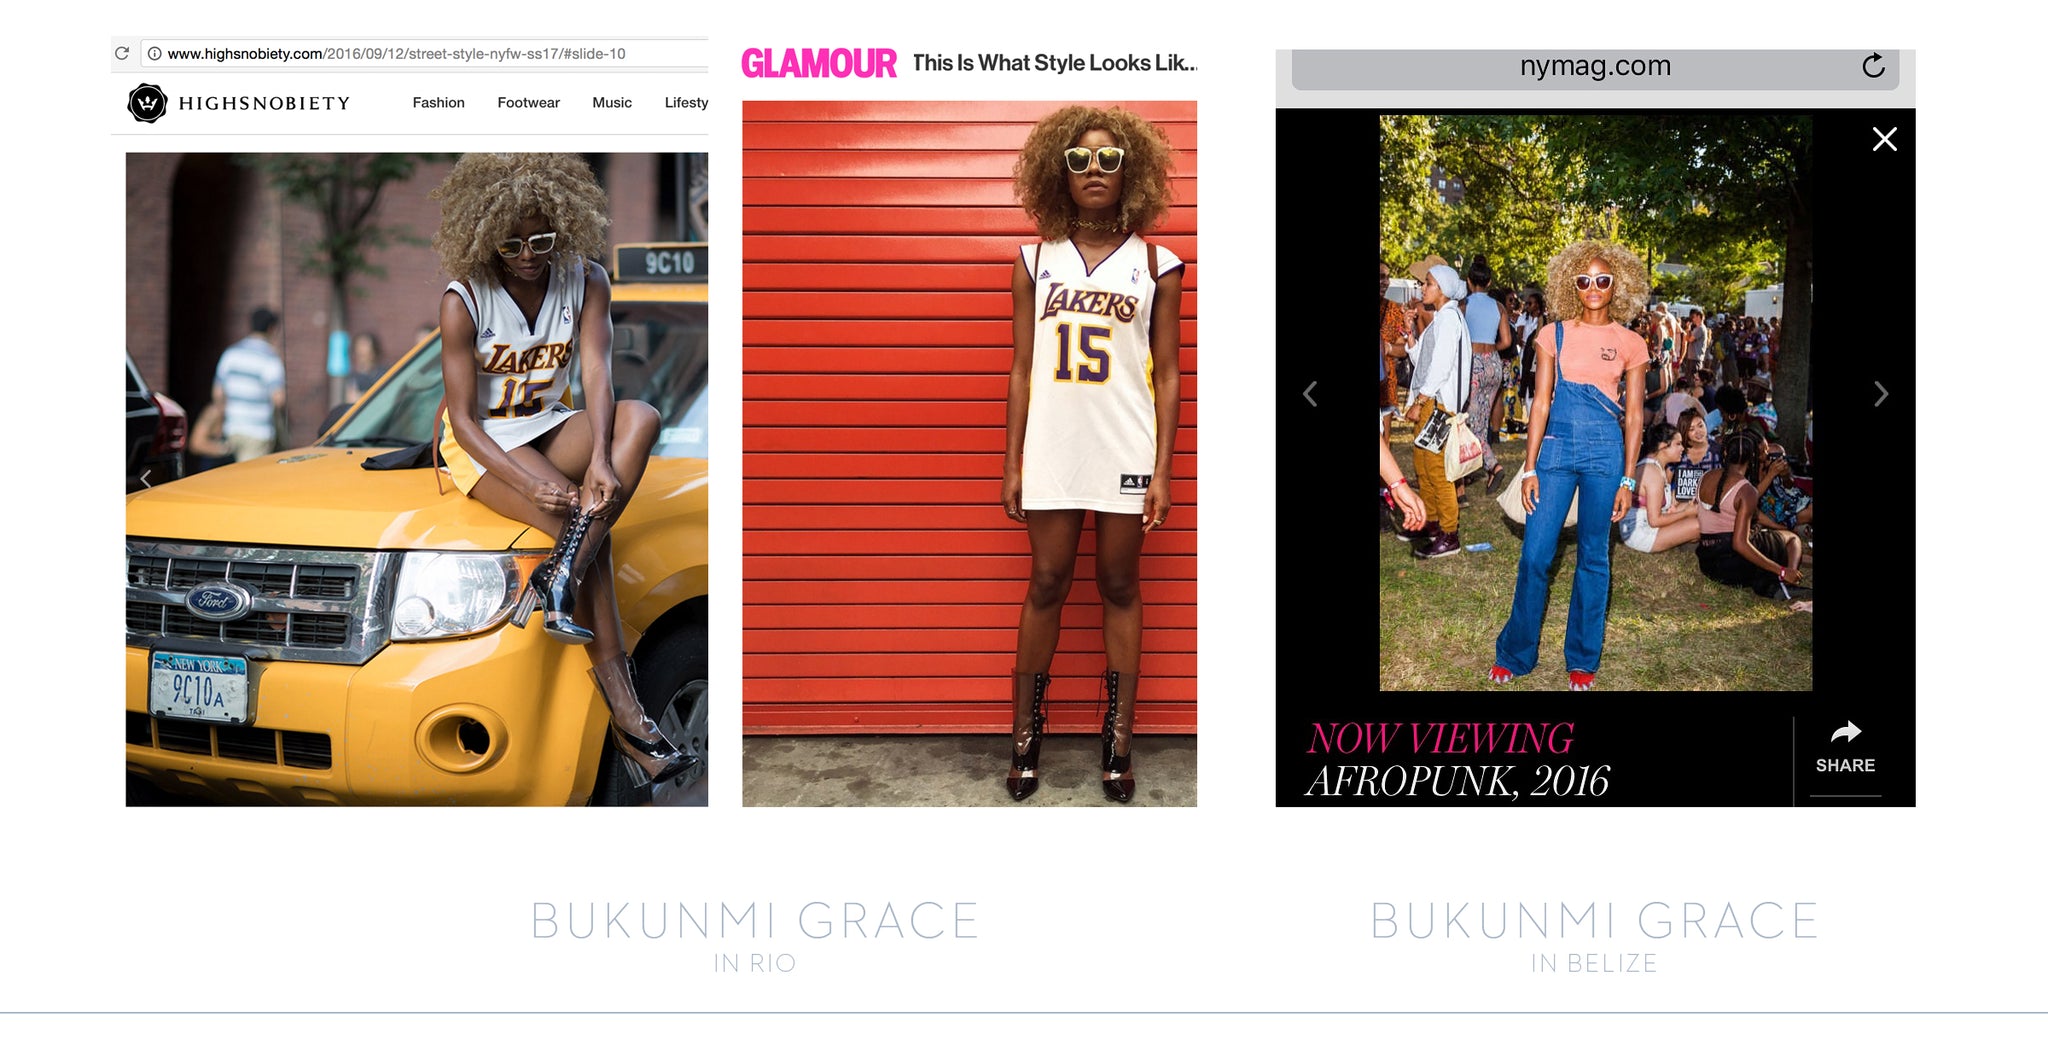 Bukunmi Grace in Tyche & Iset Designer Sunglasses -- NY Mag, The Cut, Glamour Mag, & High Snobiety